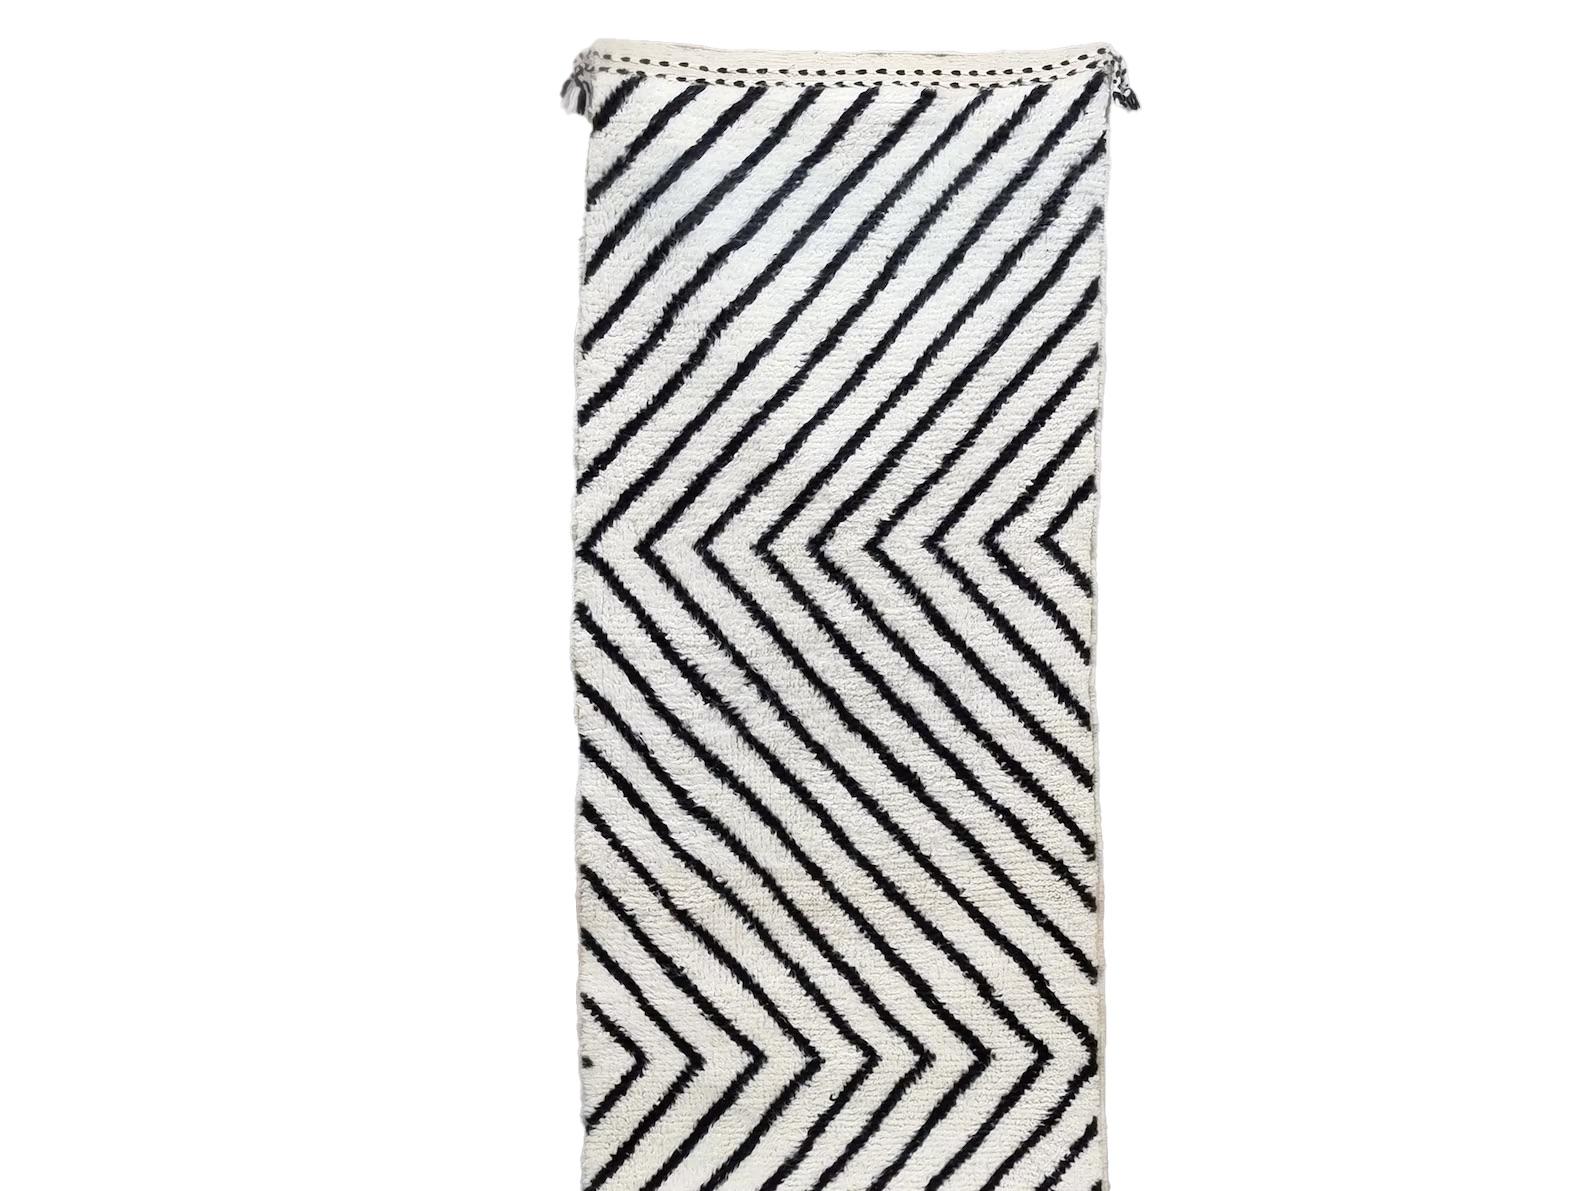 Moroccan Beniourain Black and White Striped Runner In Excellent Condition For Sale In Los Angeles, CA